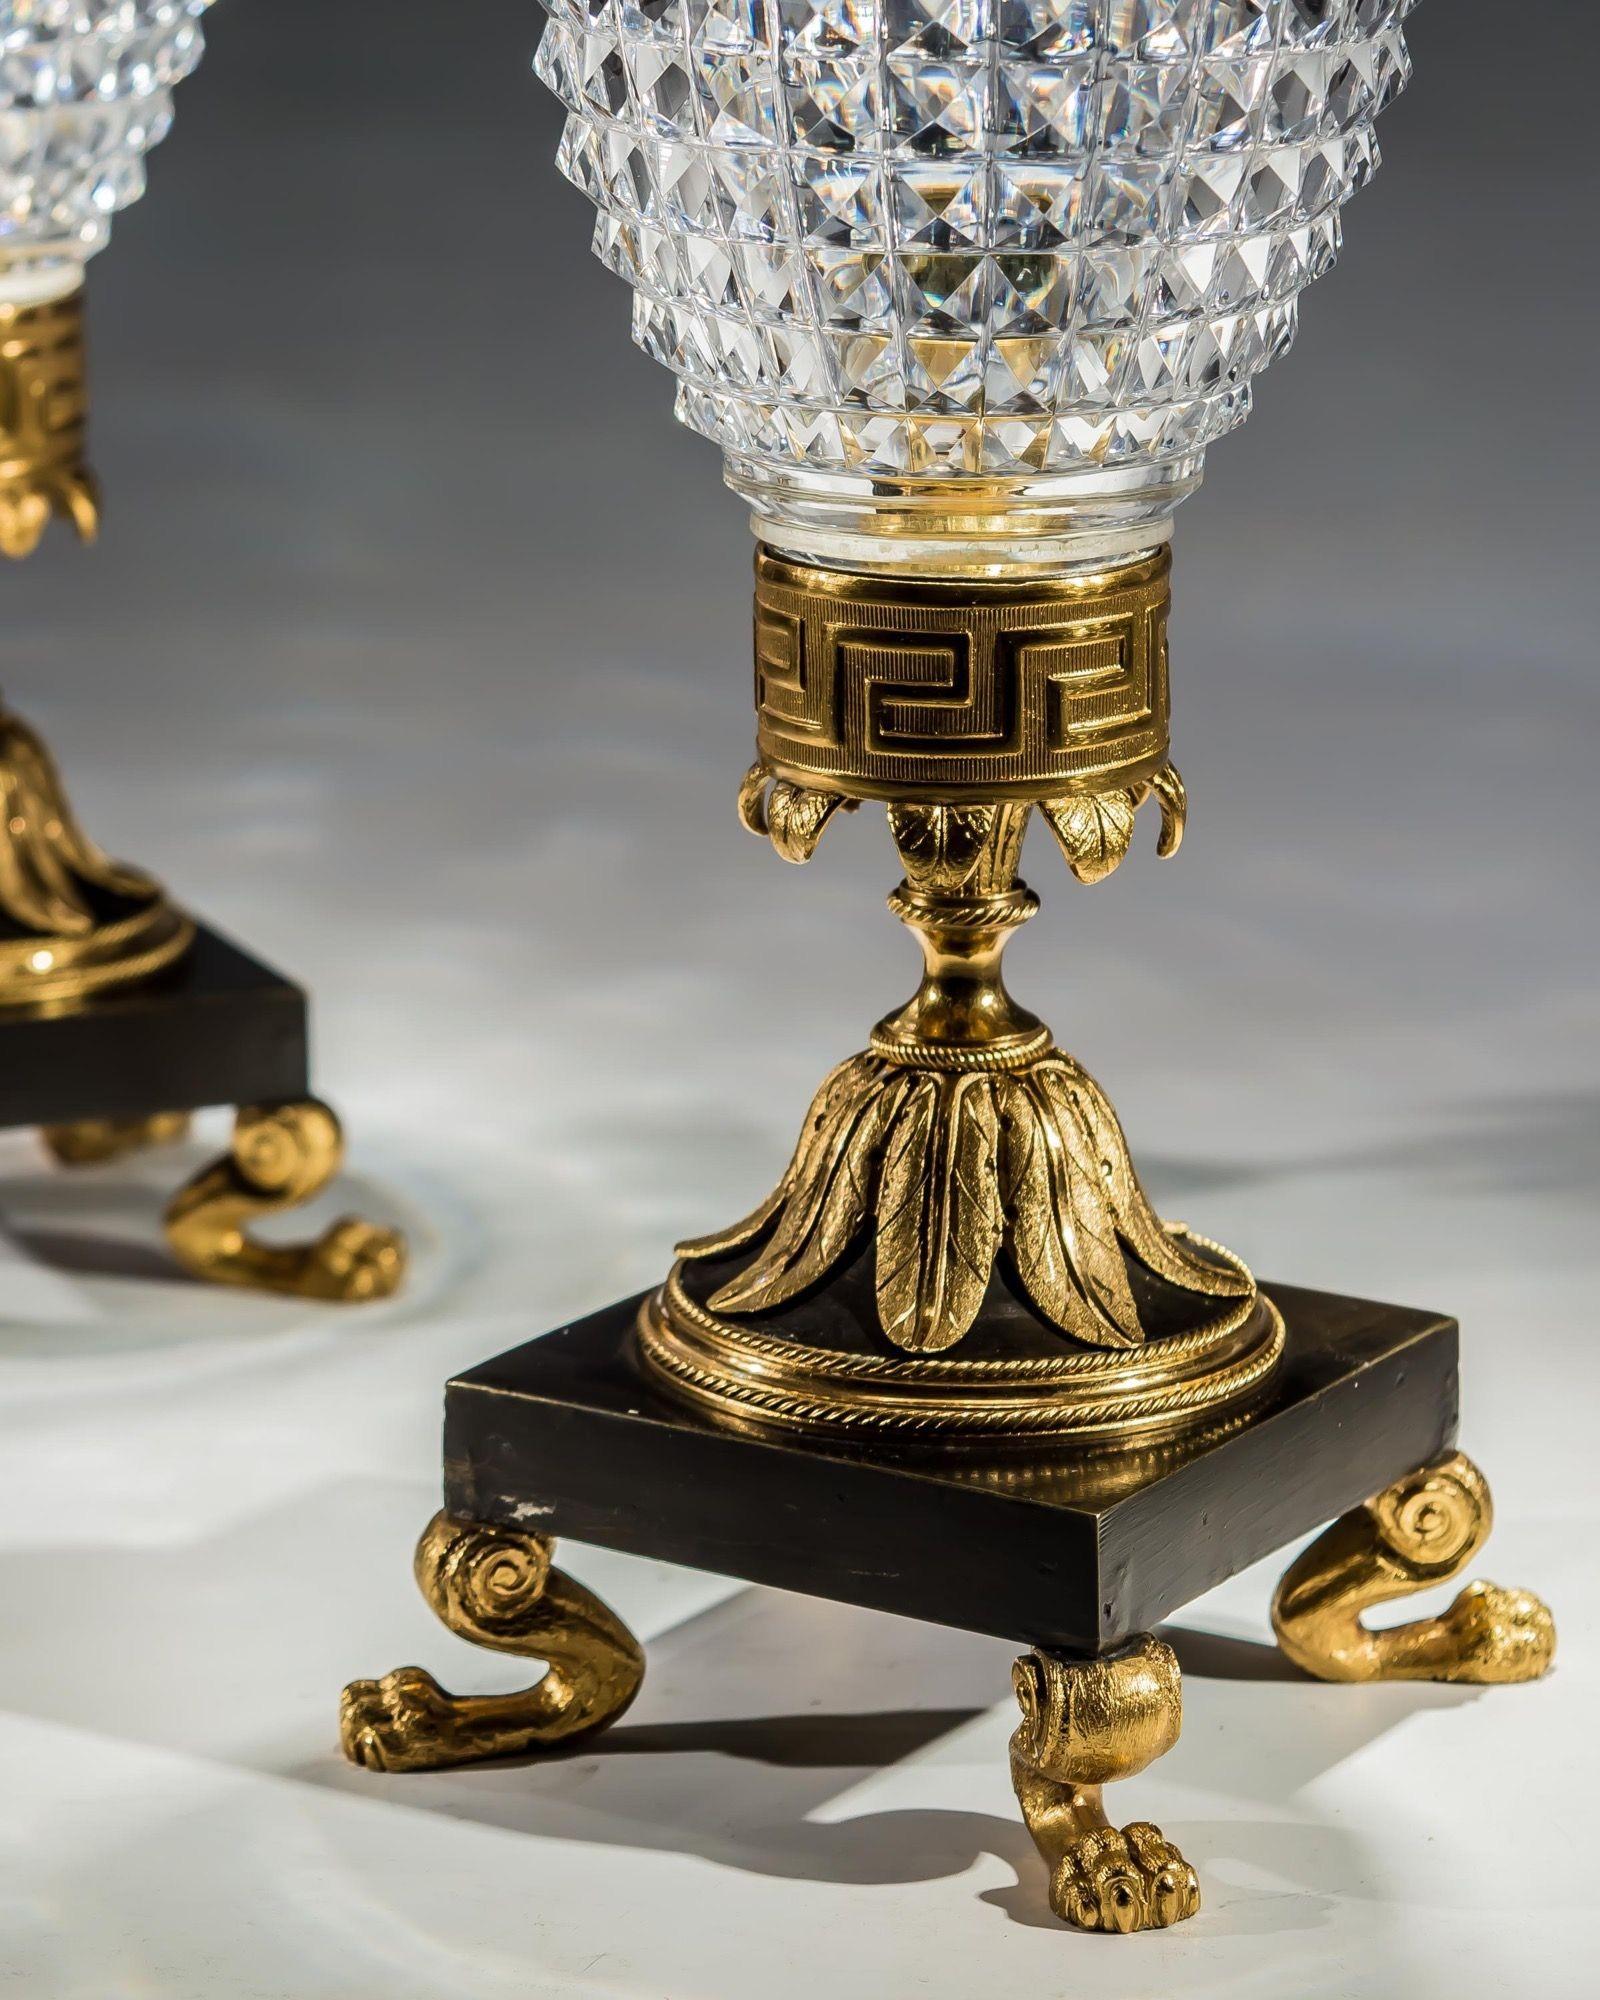 A fine pair of Regency storm lights with elaborately cut square diamond shades of bullet form, mounted on an ornate square, ormolu and bronze base with key pattern mount on foliate socle, all supported upon lion paw feet.